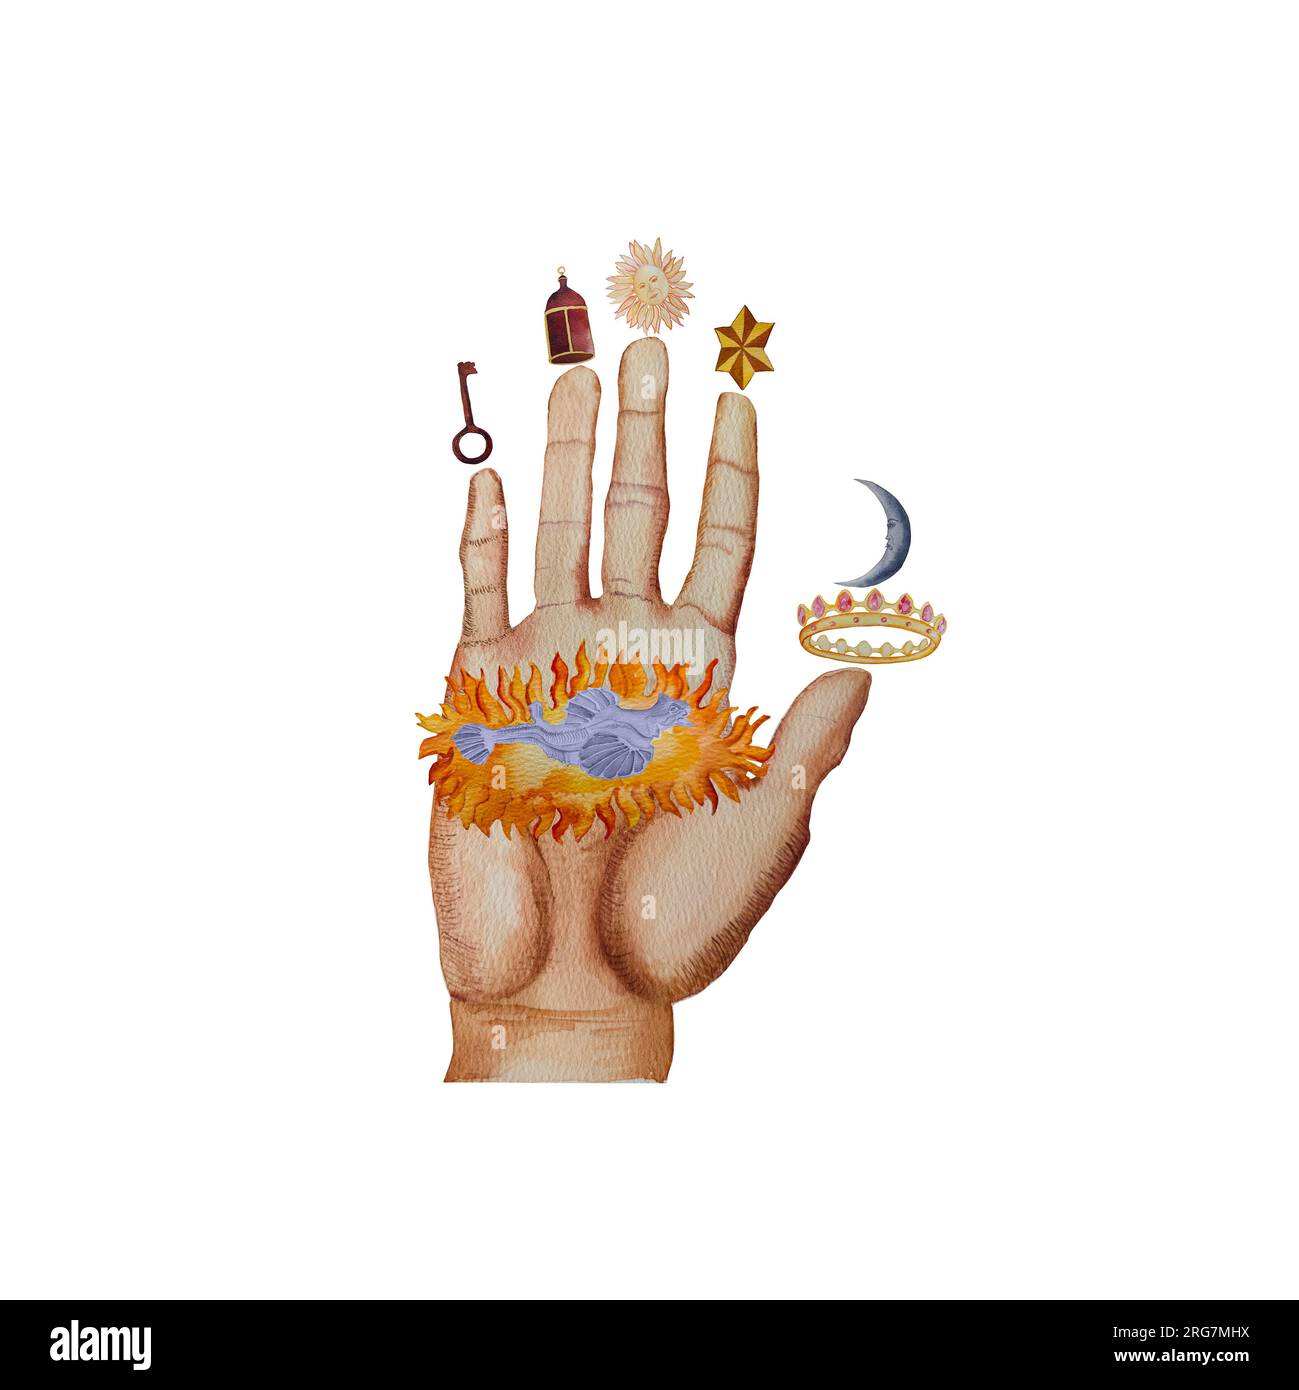 Philosophical hand, symbol of alchemy painted in watercolor Stock Photo